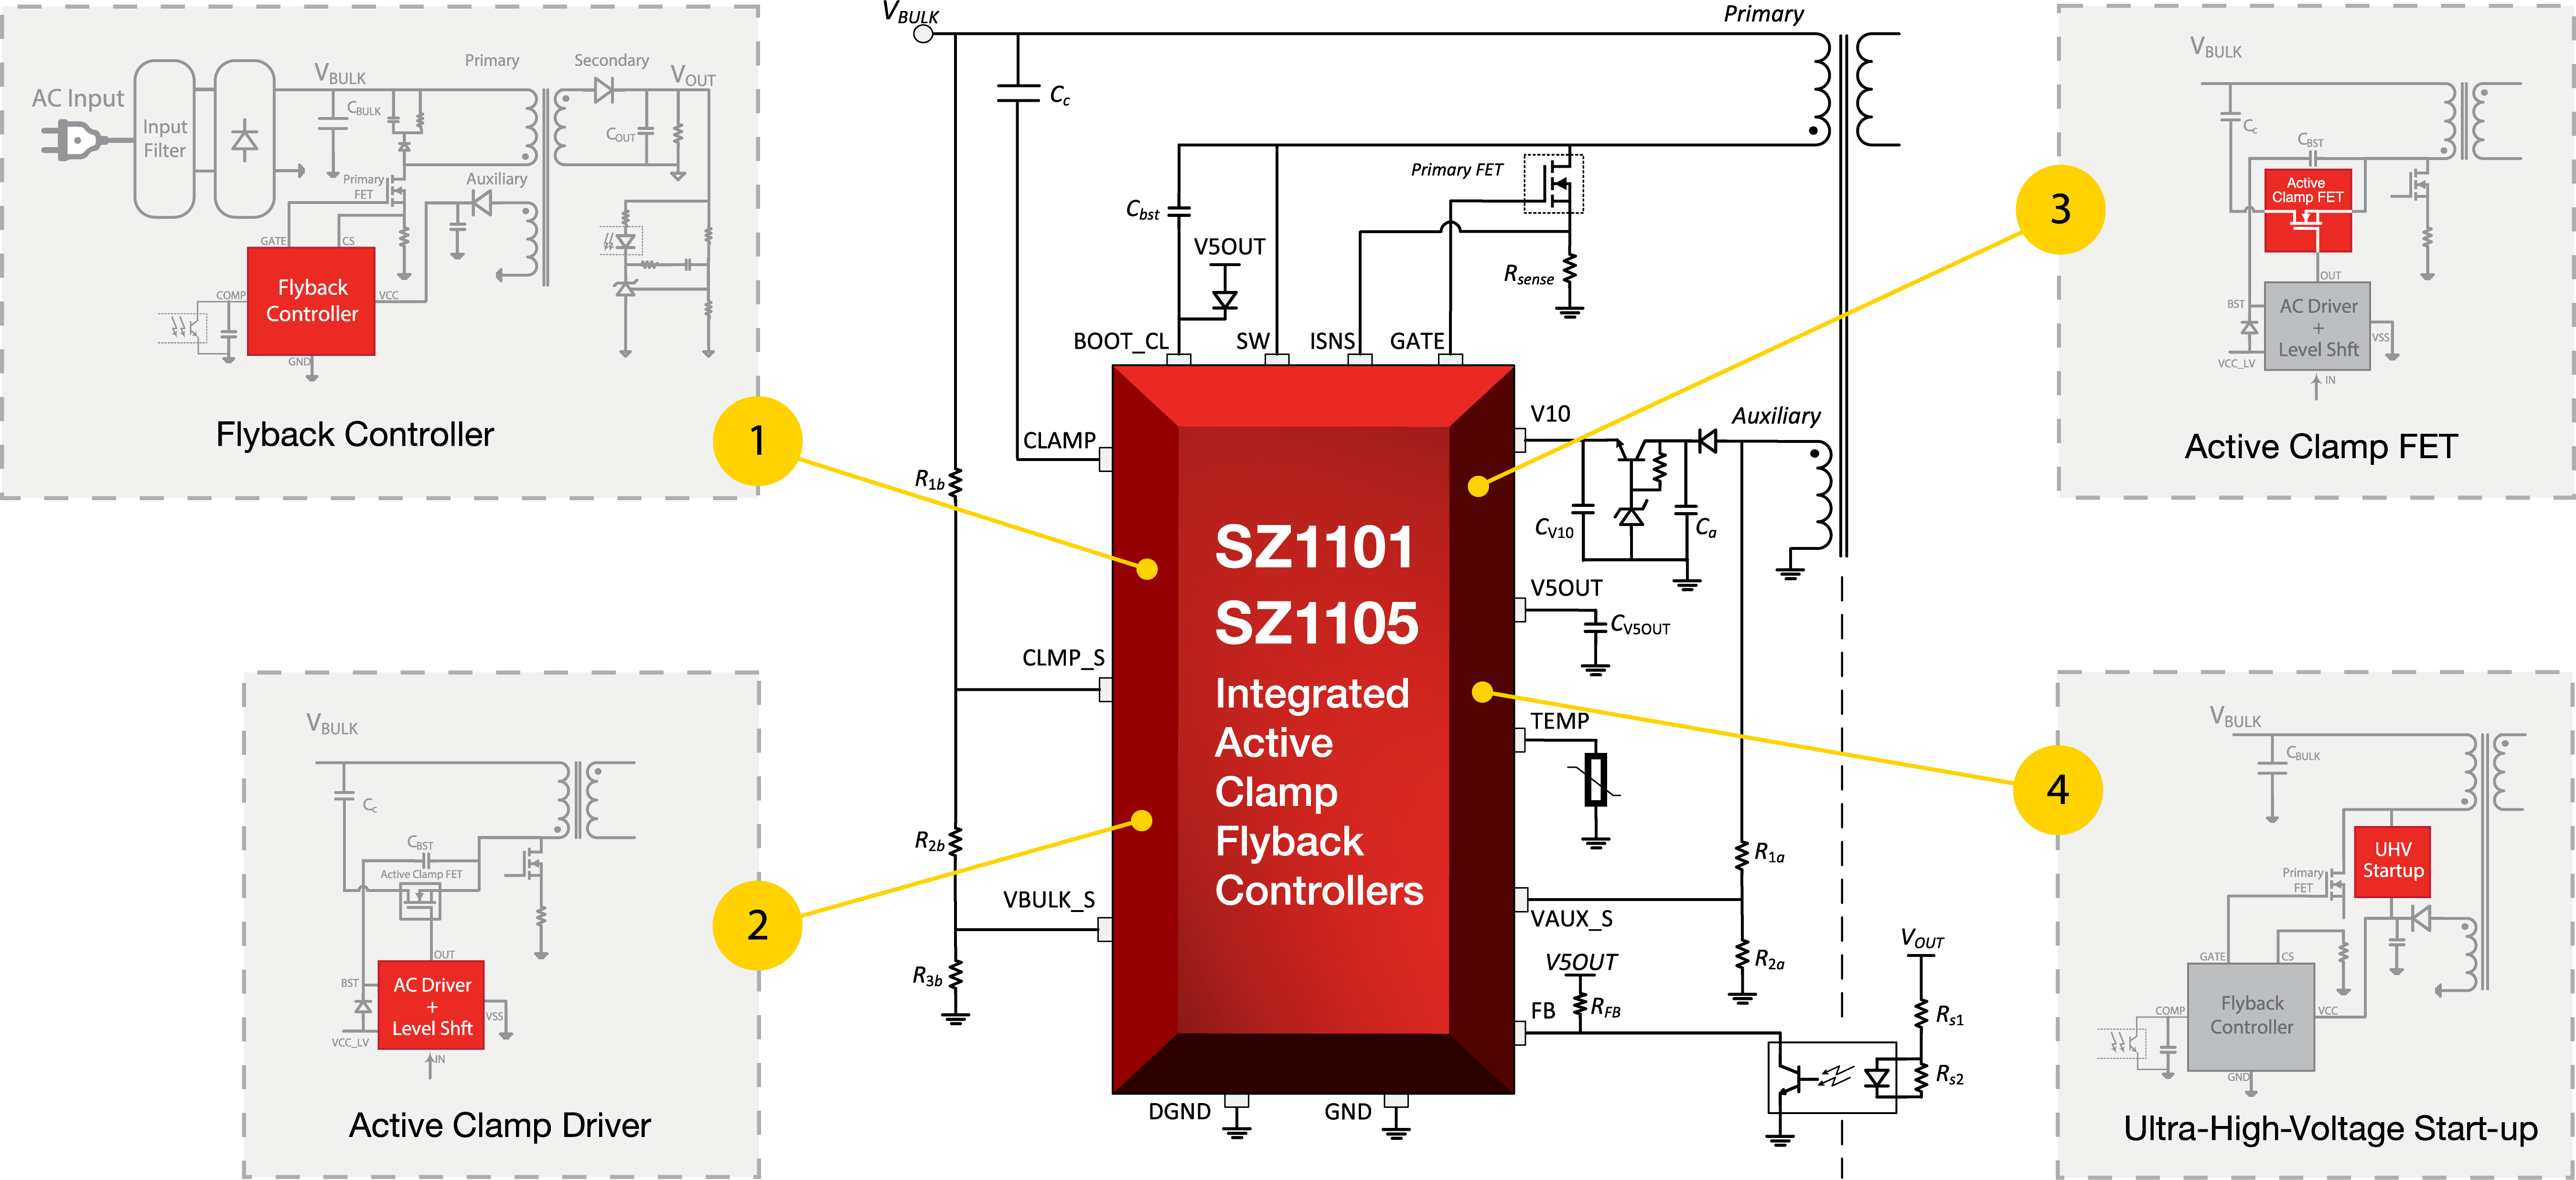 33W and 65W controllers combine four key ACF components: an advanced adaptive digital ACF controller and three UHV components: active clamp MOSFET, active clamp FET driver,   startup voltage regulator